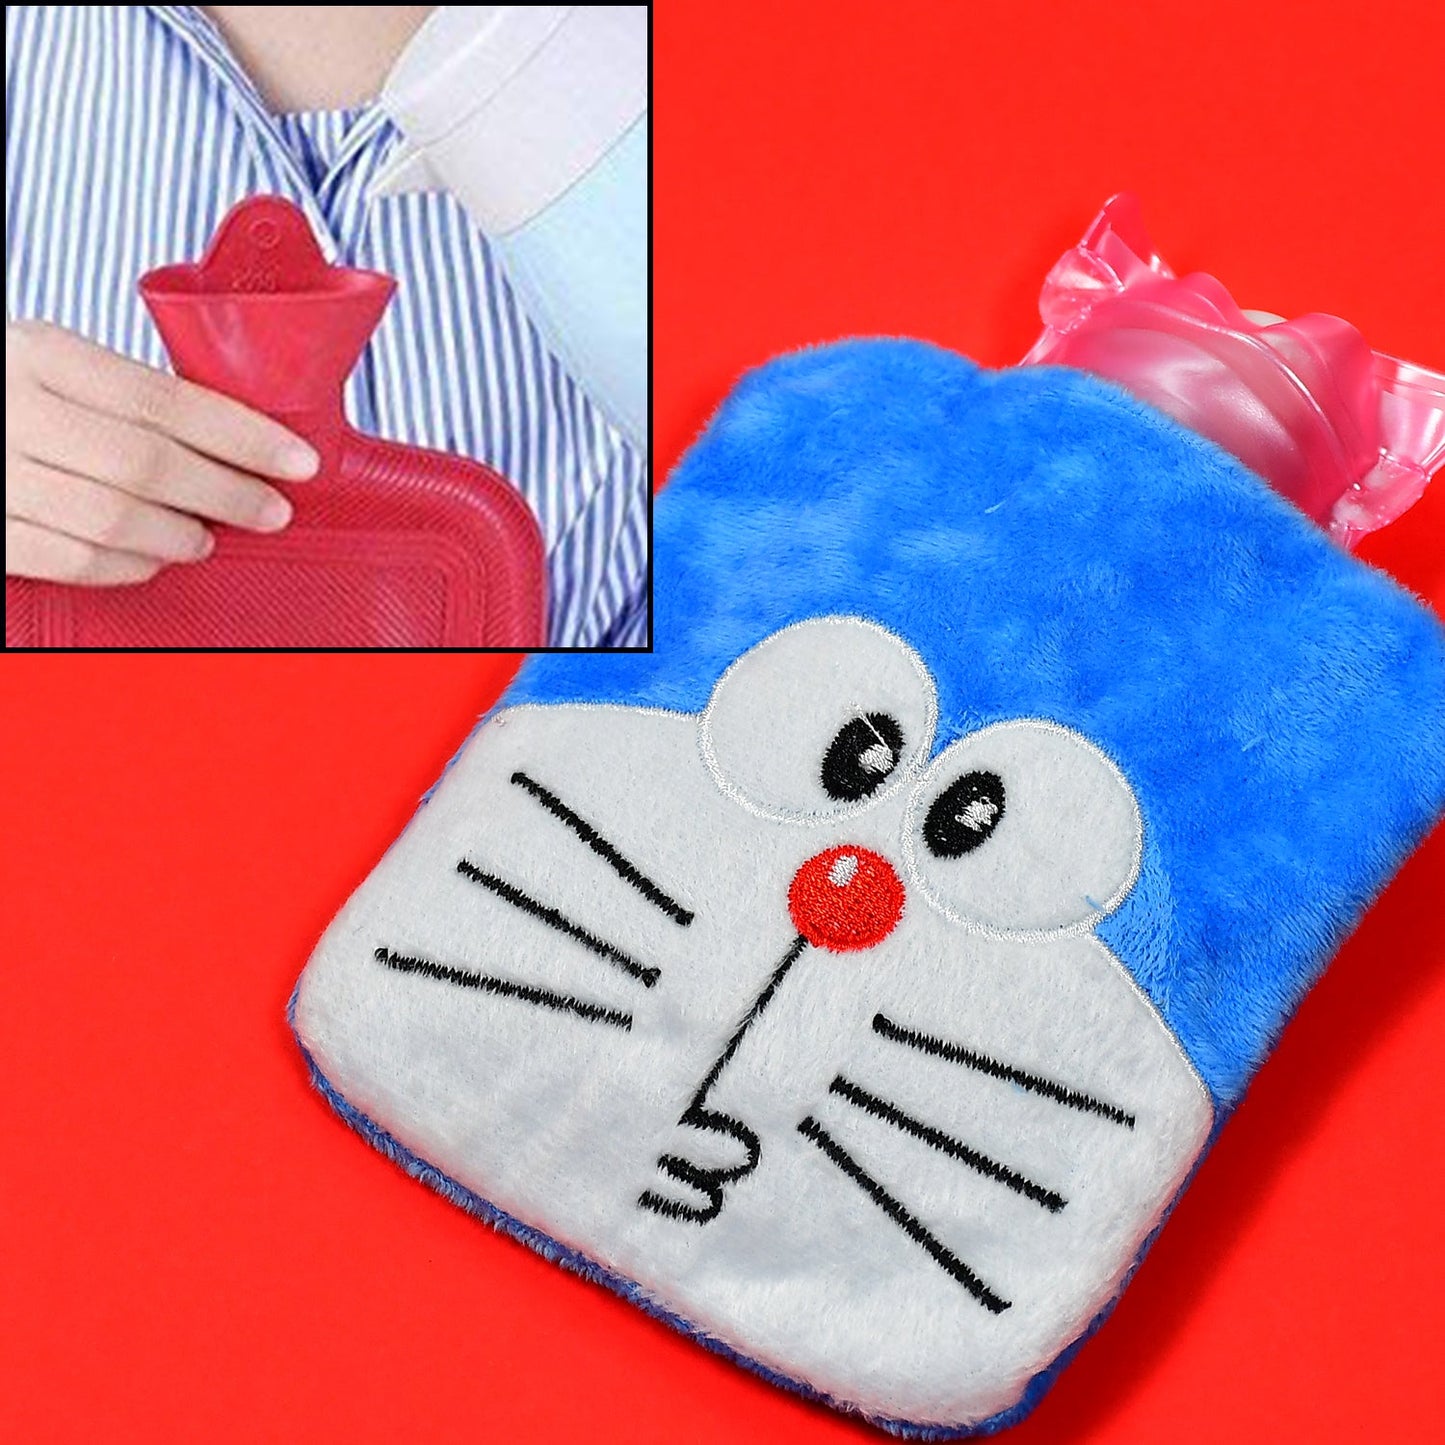 6504 Doremon small Hot Water Bag with Cover for Pain Relief, Neck, Shoulder Pain and Hand, Feet Warmer, Menstrual Cramps. 